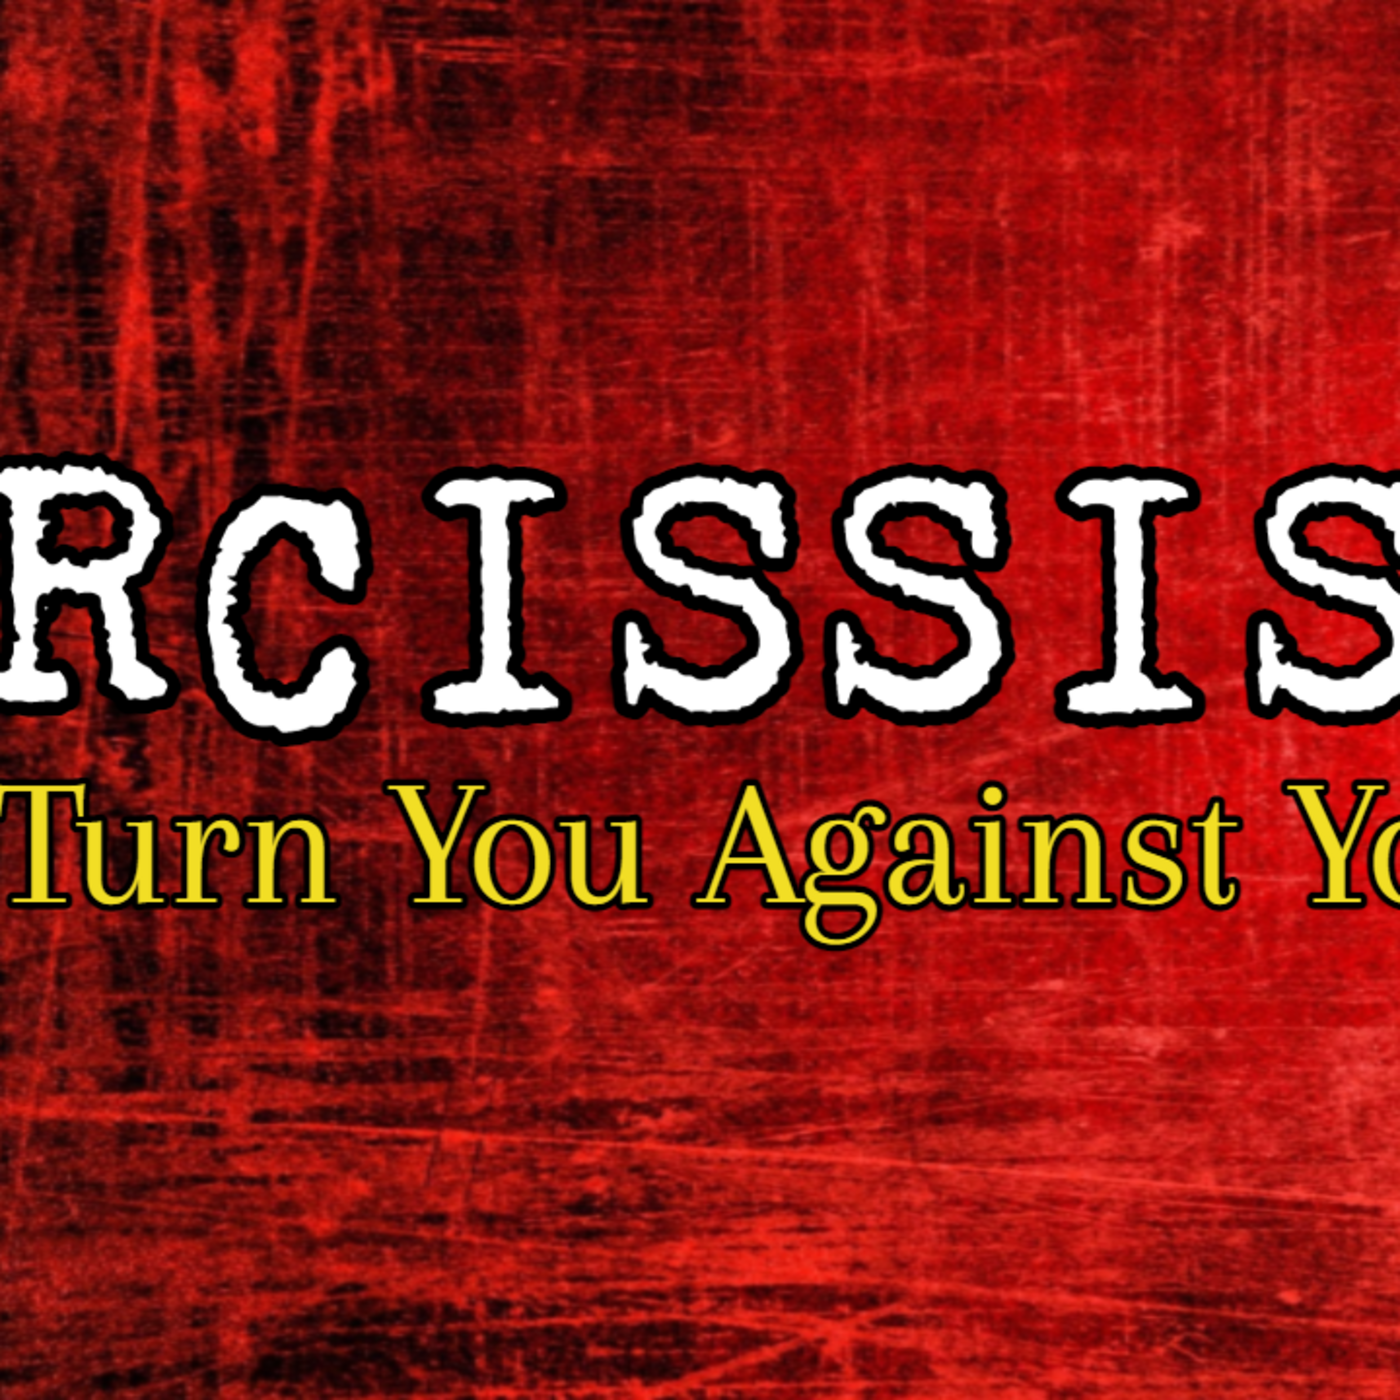 Episode 199: Narcissists Try To Turn You Against Yourself